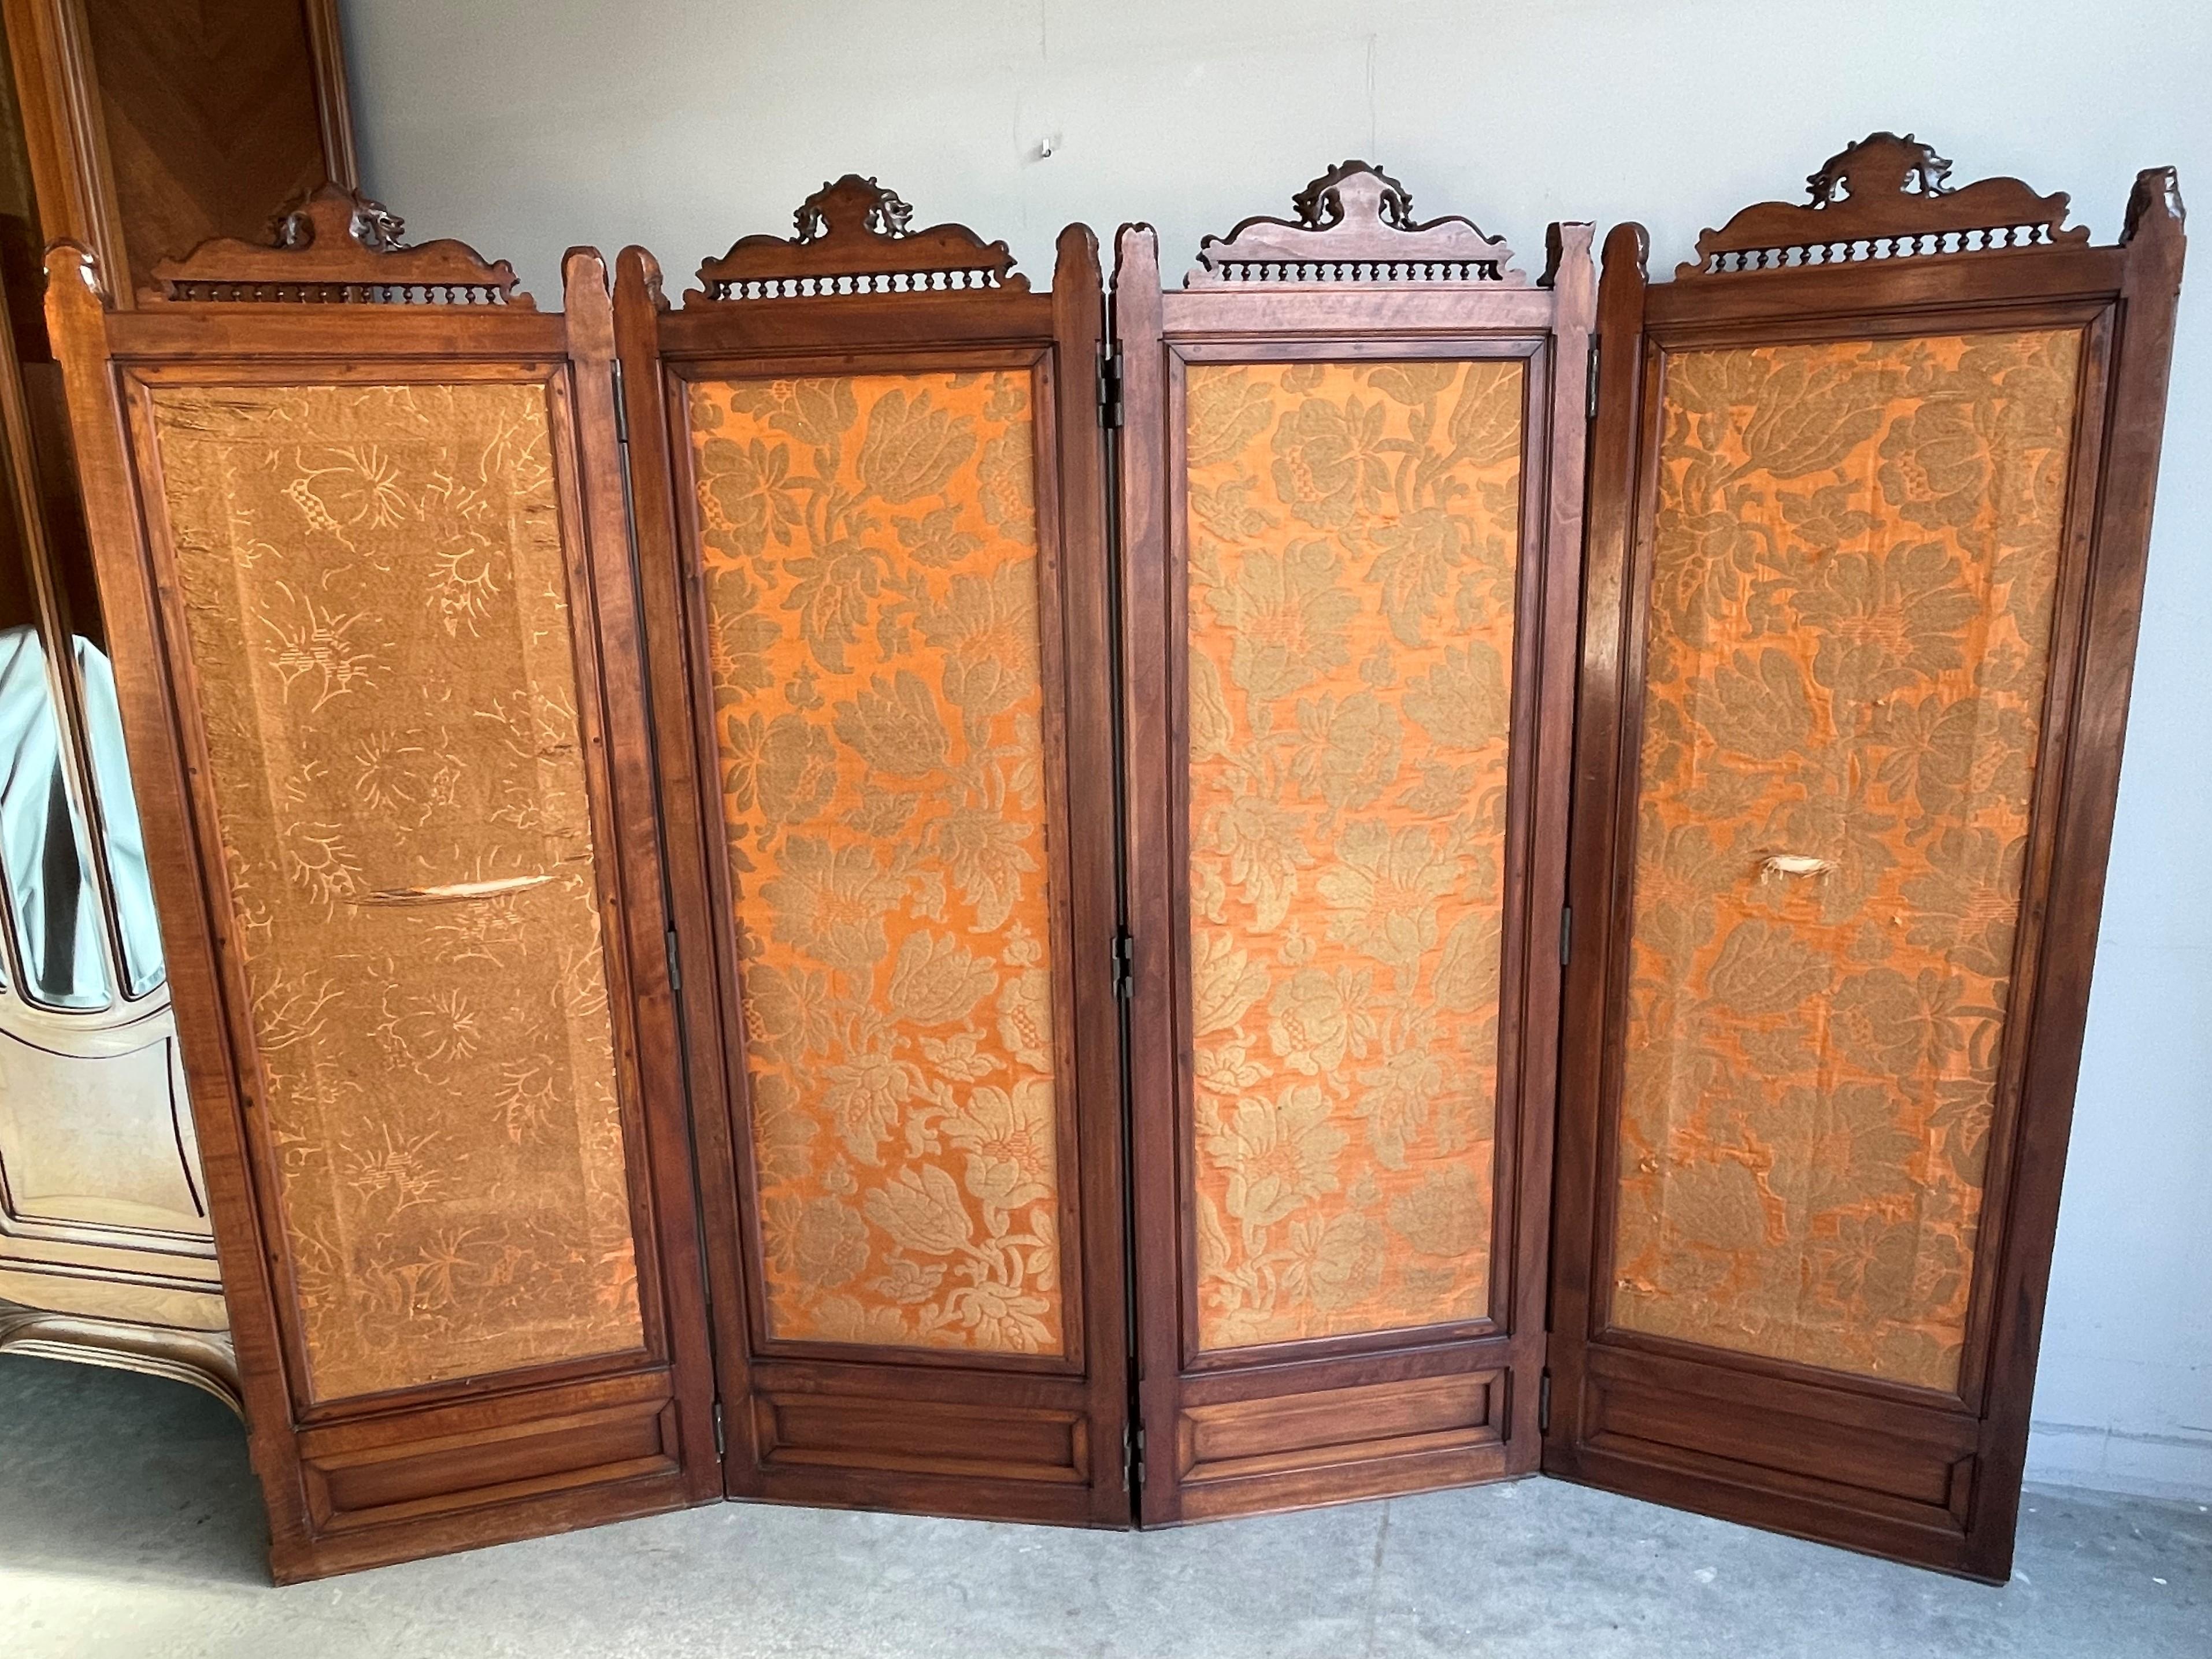 Stunning Renaissance Revival Folding Screen w. Embroidery and 8 Bust Sculptures 12